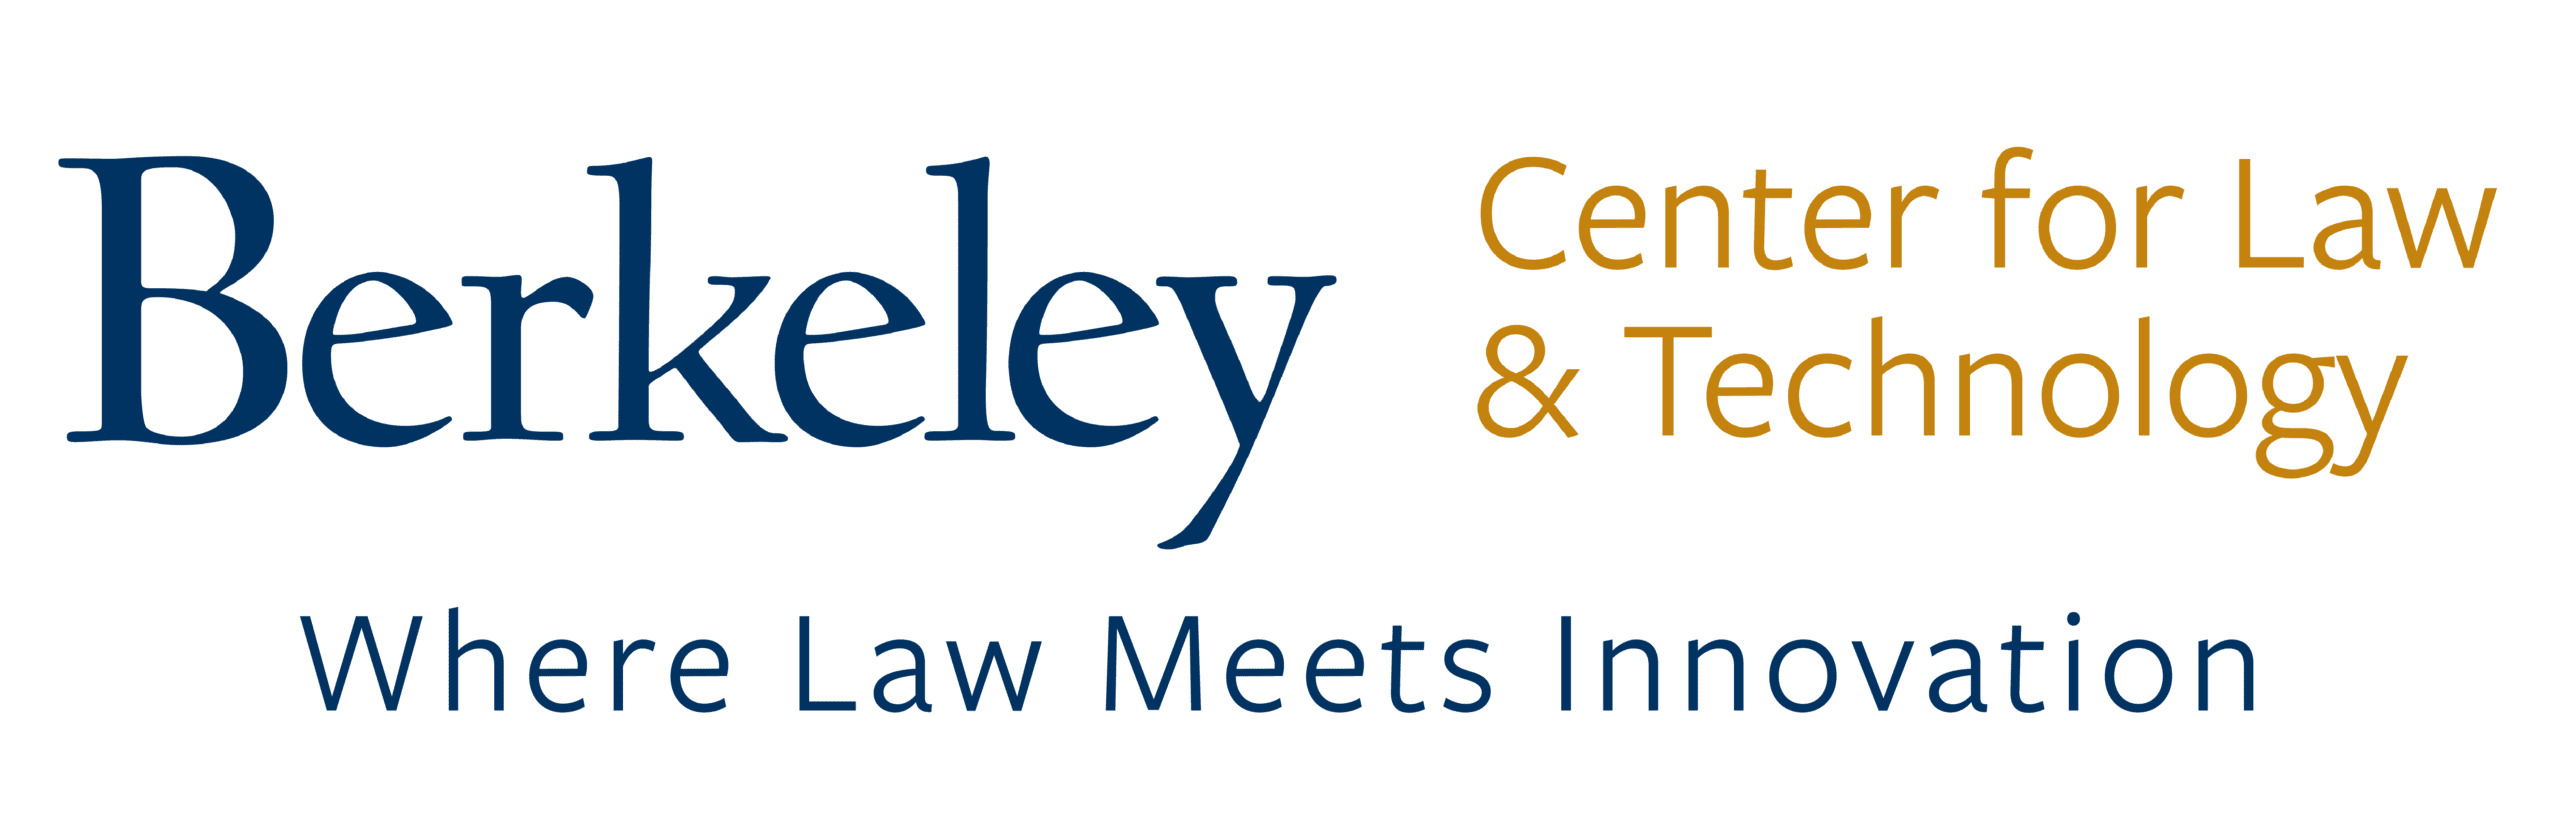 Berkeley Center for Law & Technology. Where Law Meets Innovation.